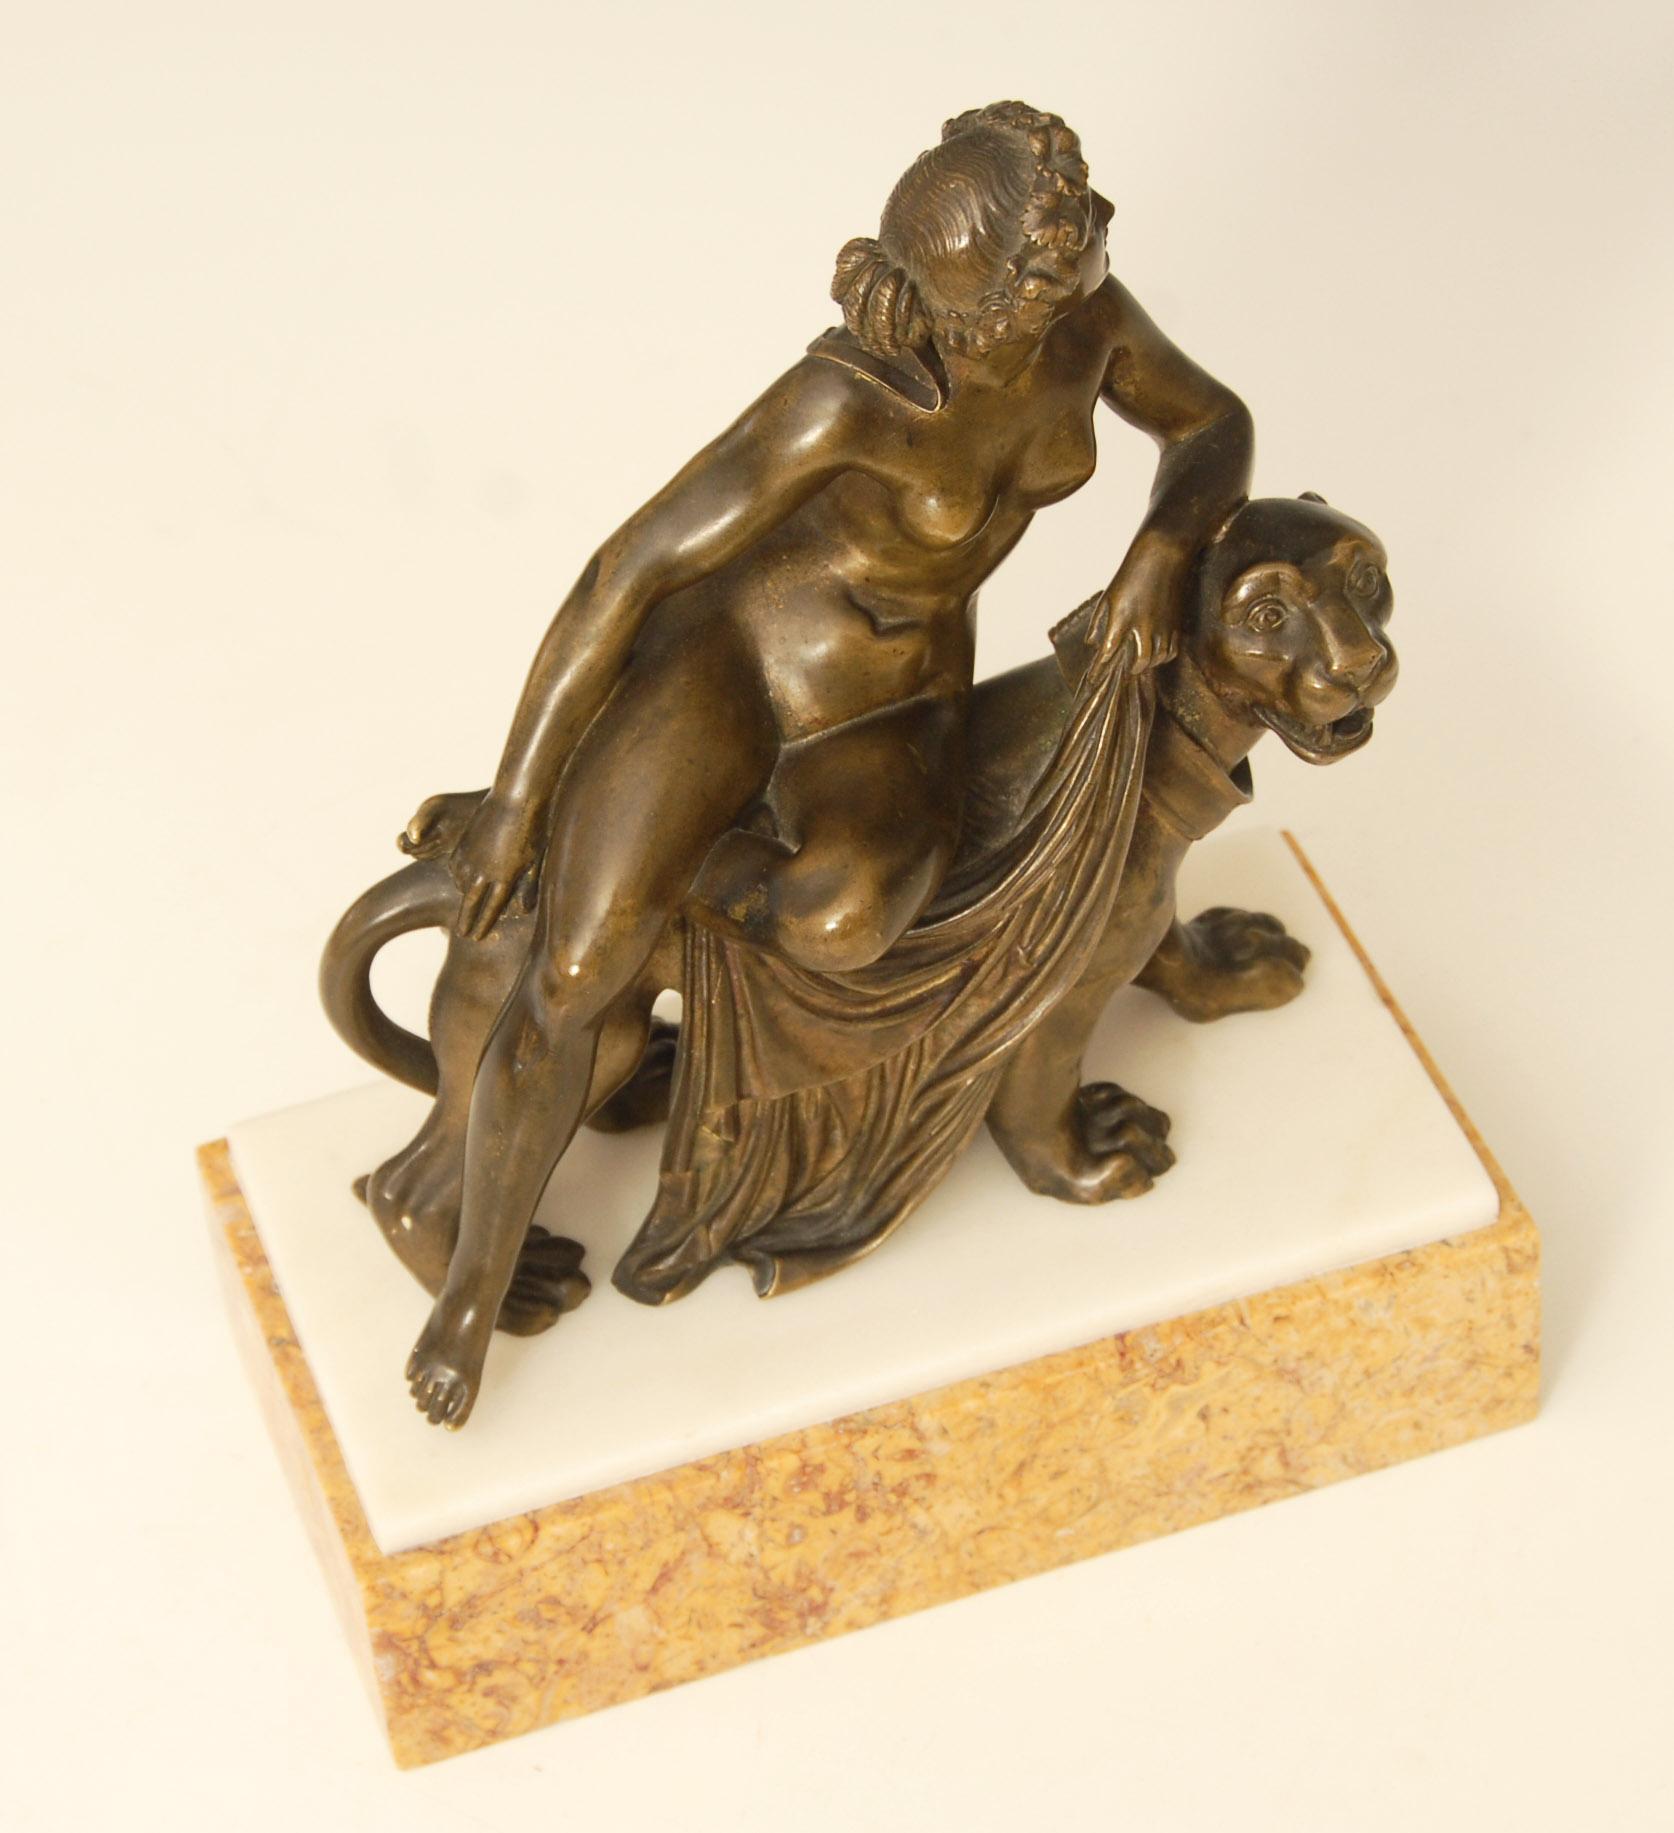 Italian Regency Bronze Statue or Sculpture of a Nude Female Riding on a Lion For Sale